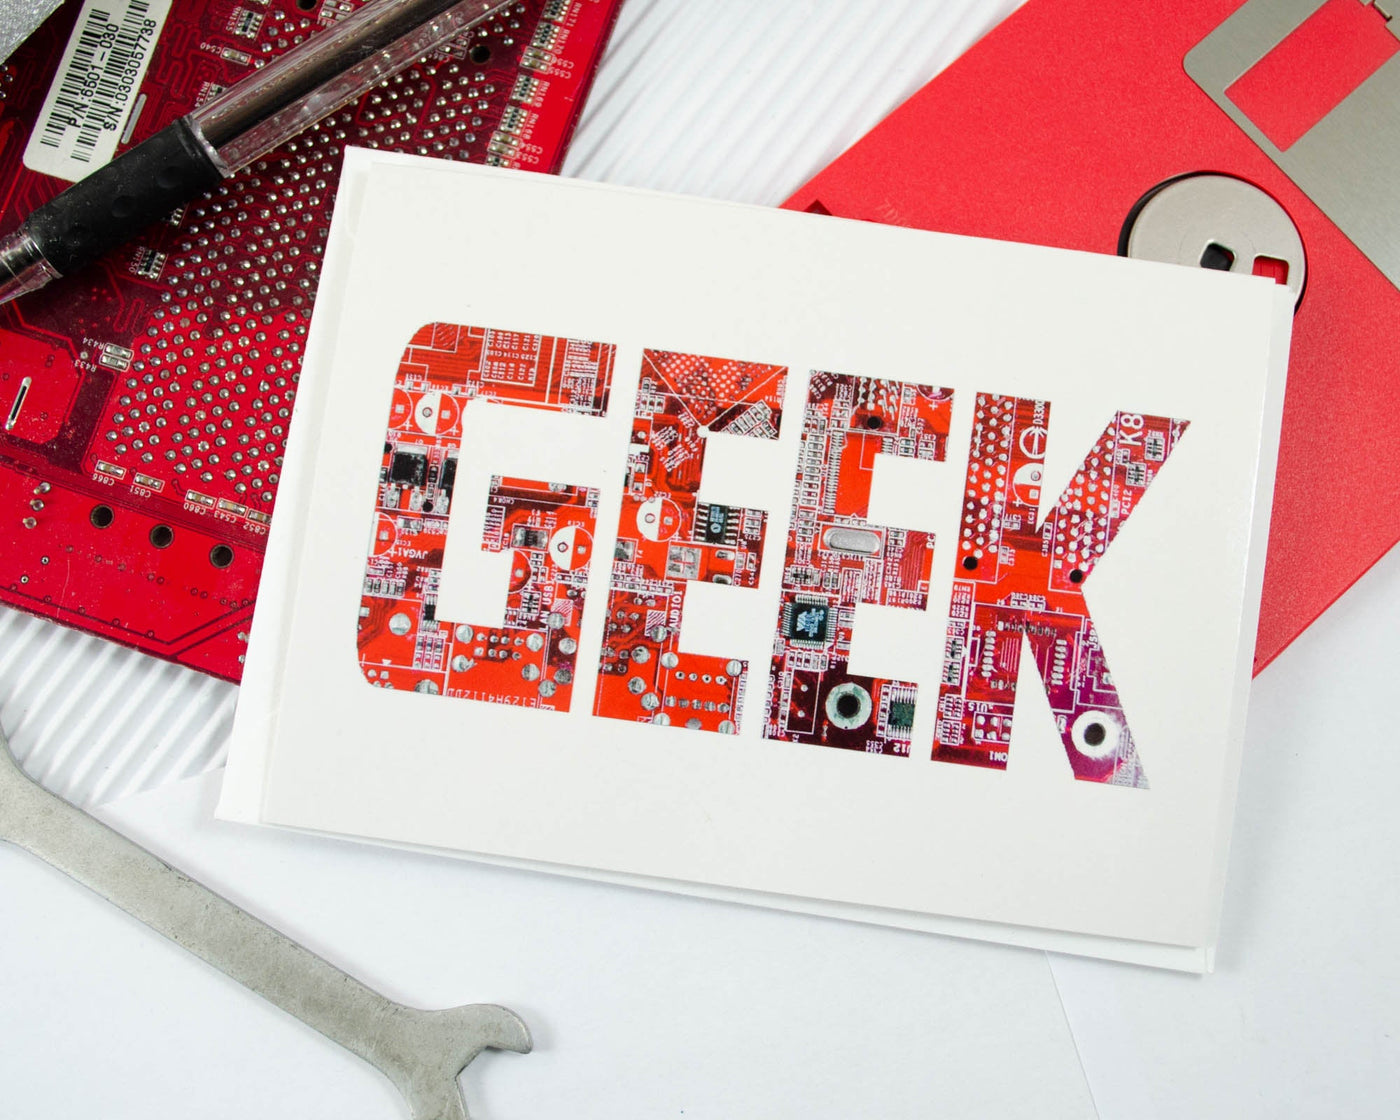 geek card made from recycled circuit board